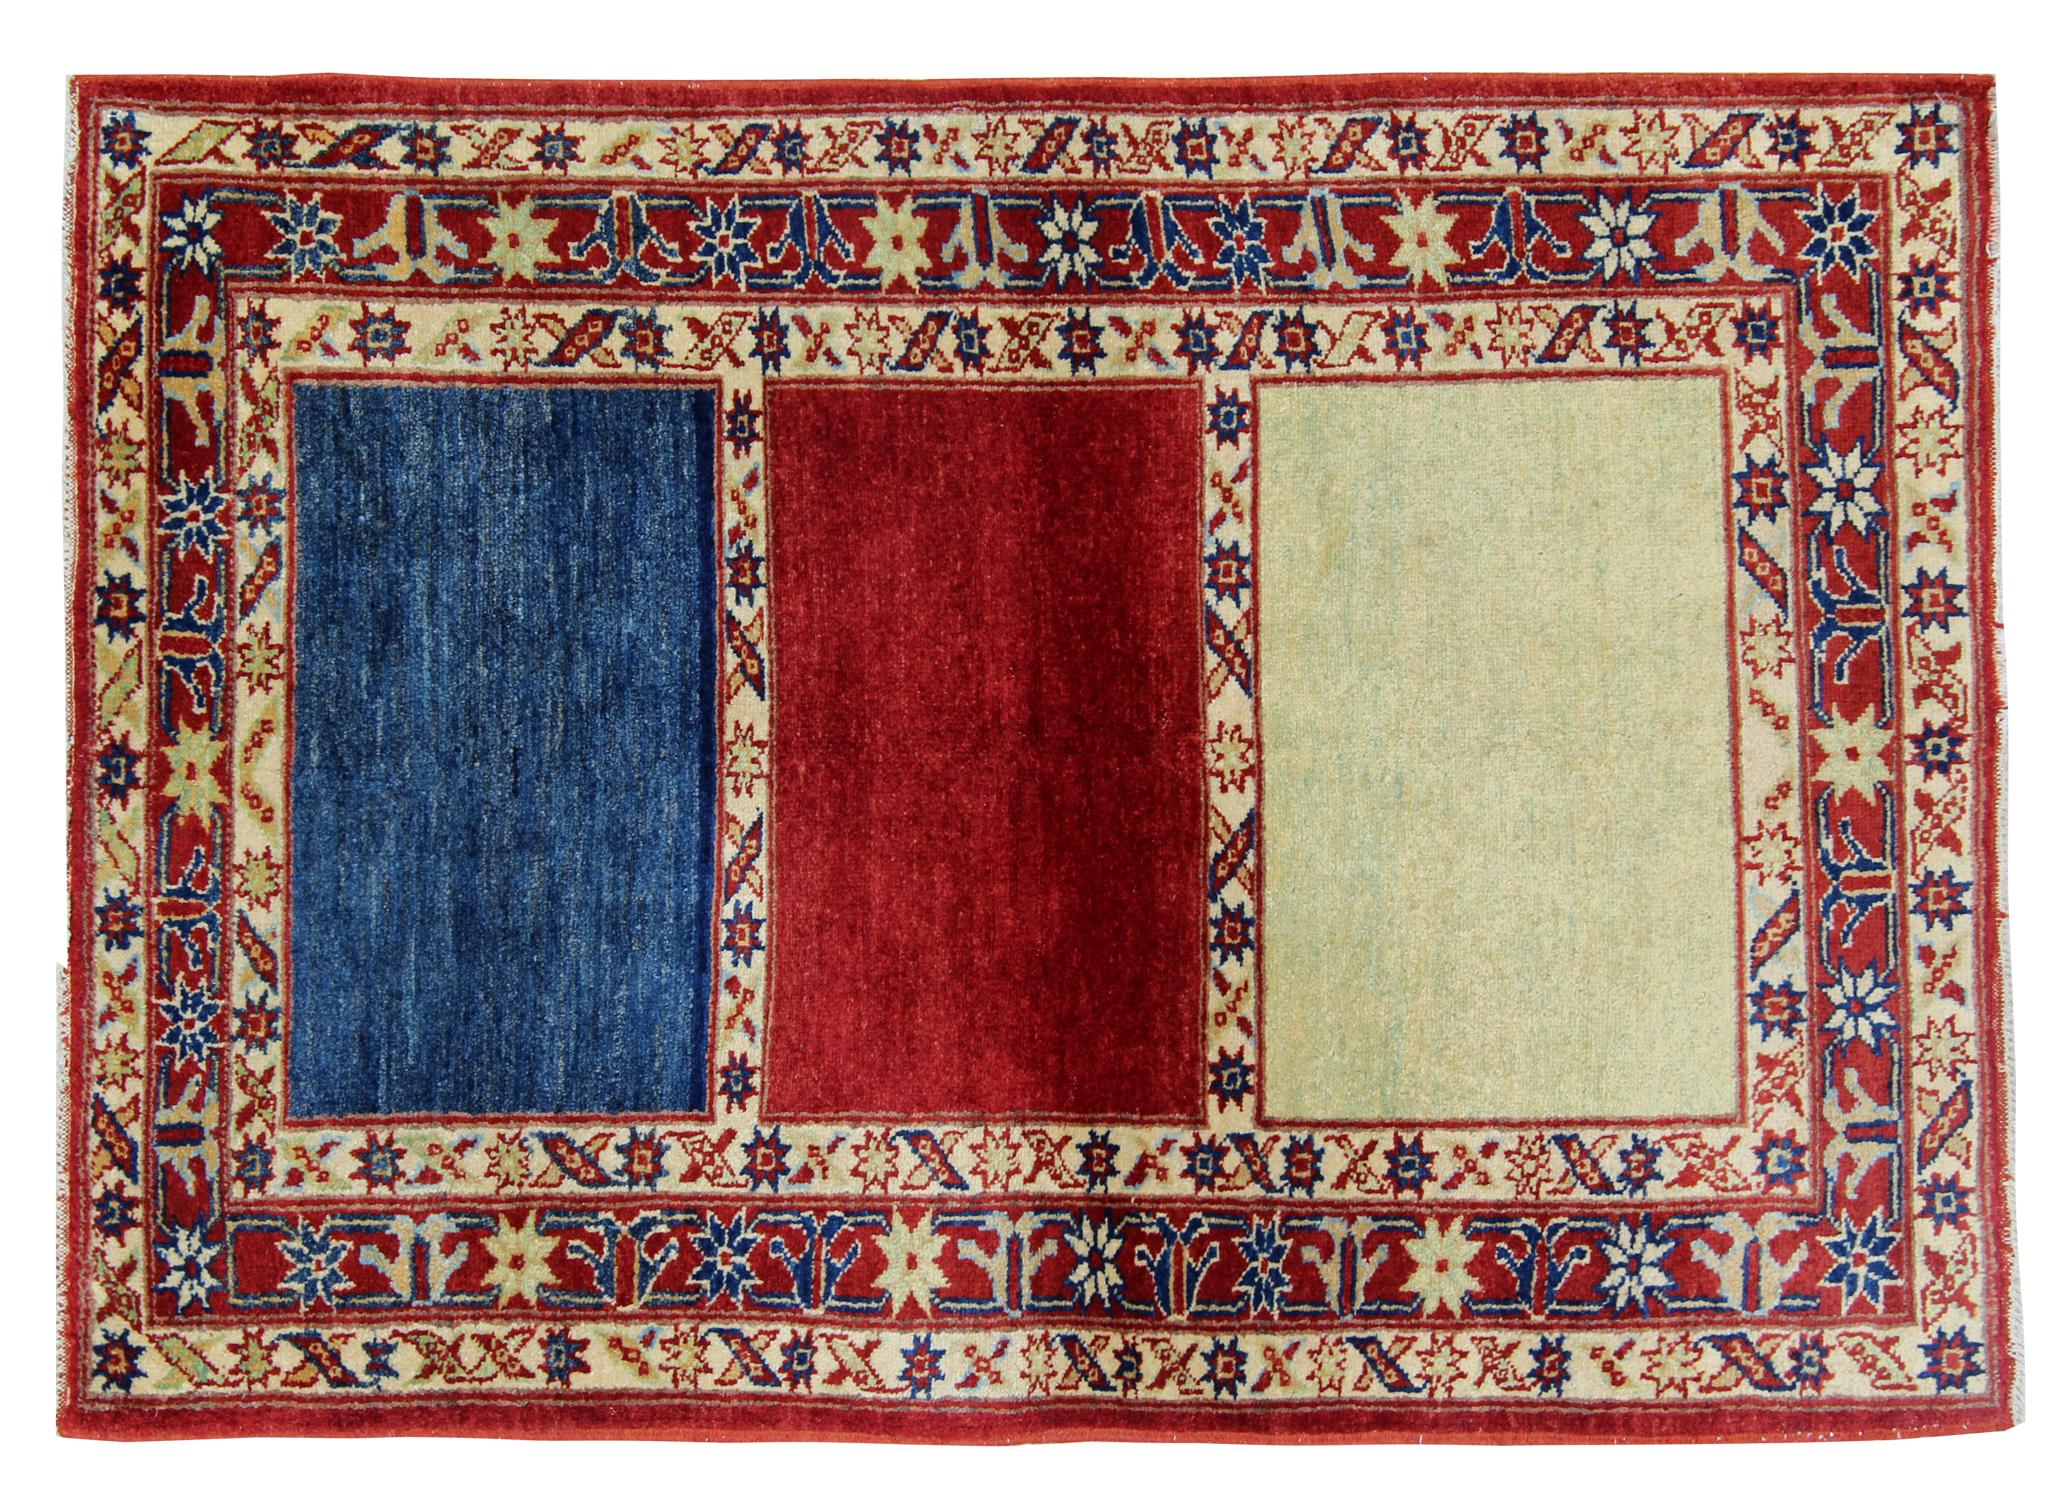 These handmade carpet new traditional rugs are handwoven rugs that come in a striking colour combination. This striped rug has red, blue, and yellow colours. The pattern on the border of the carpet rug has been influenced by Caucasian designs. These